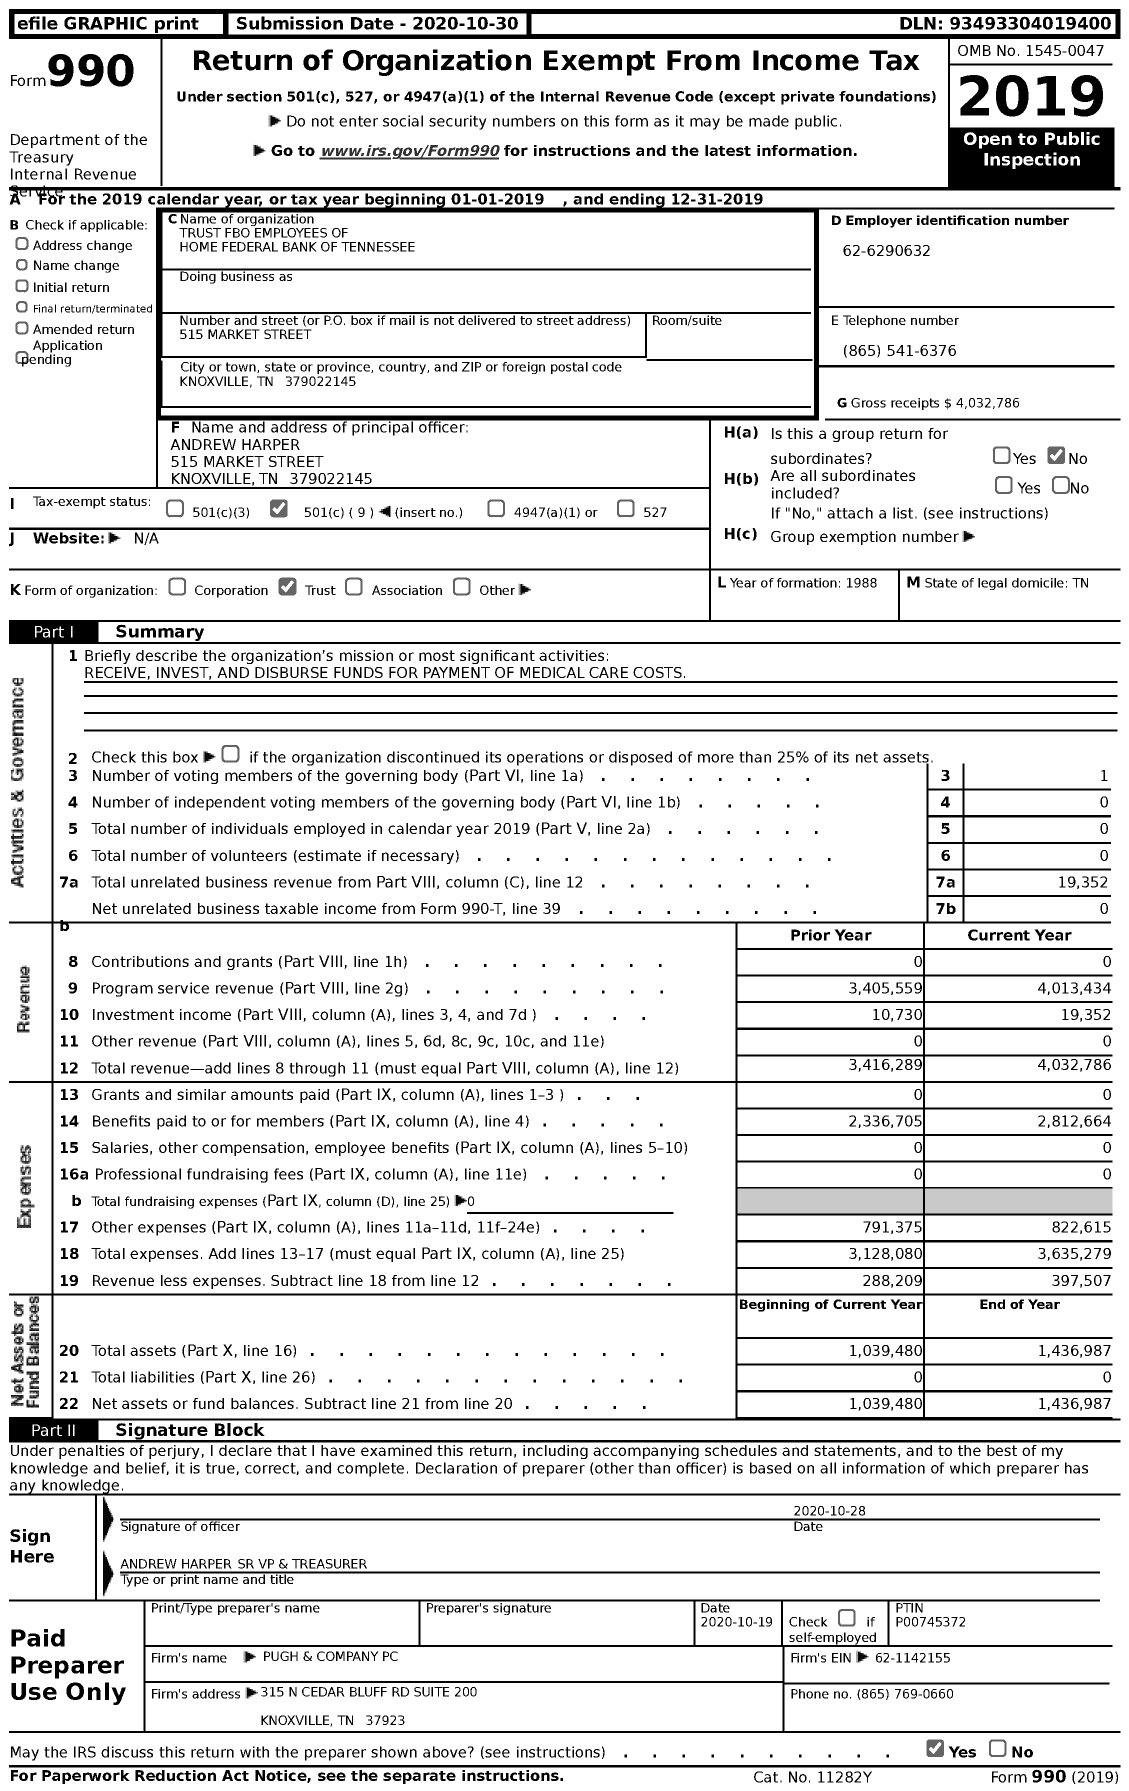 Image of first page of 2019 Form 990 for Trust Fbo Employees of Home Federal Bank of Tennessee